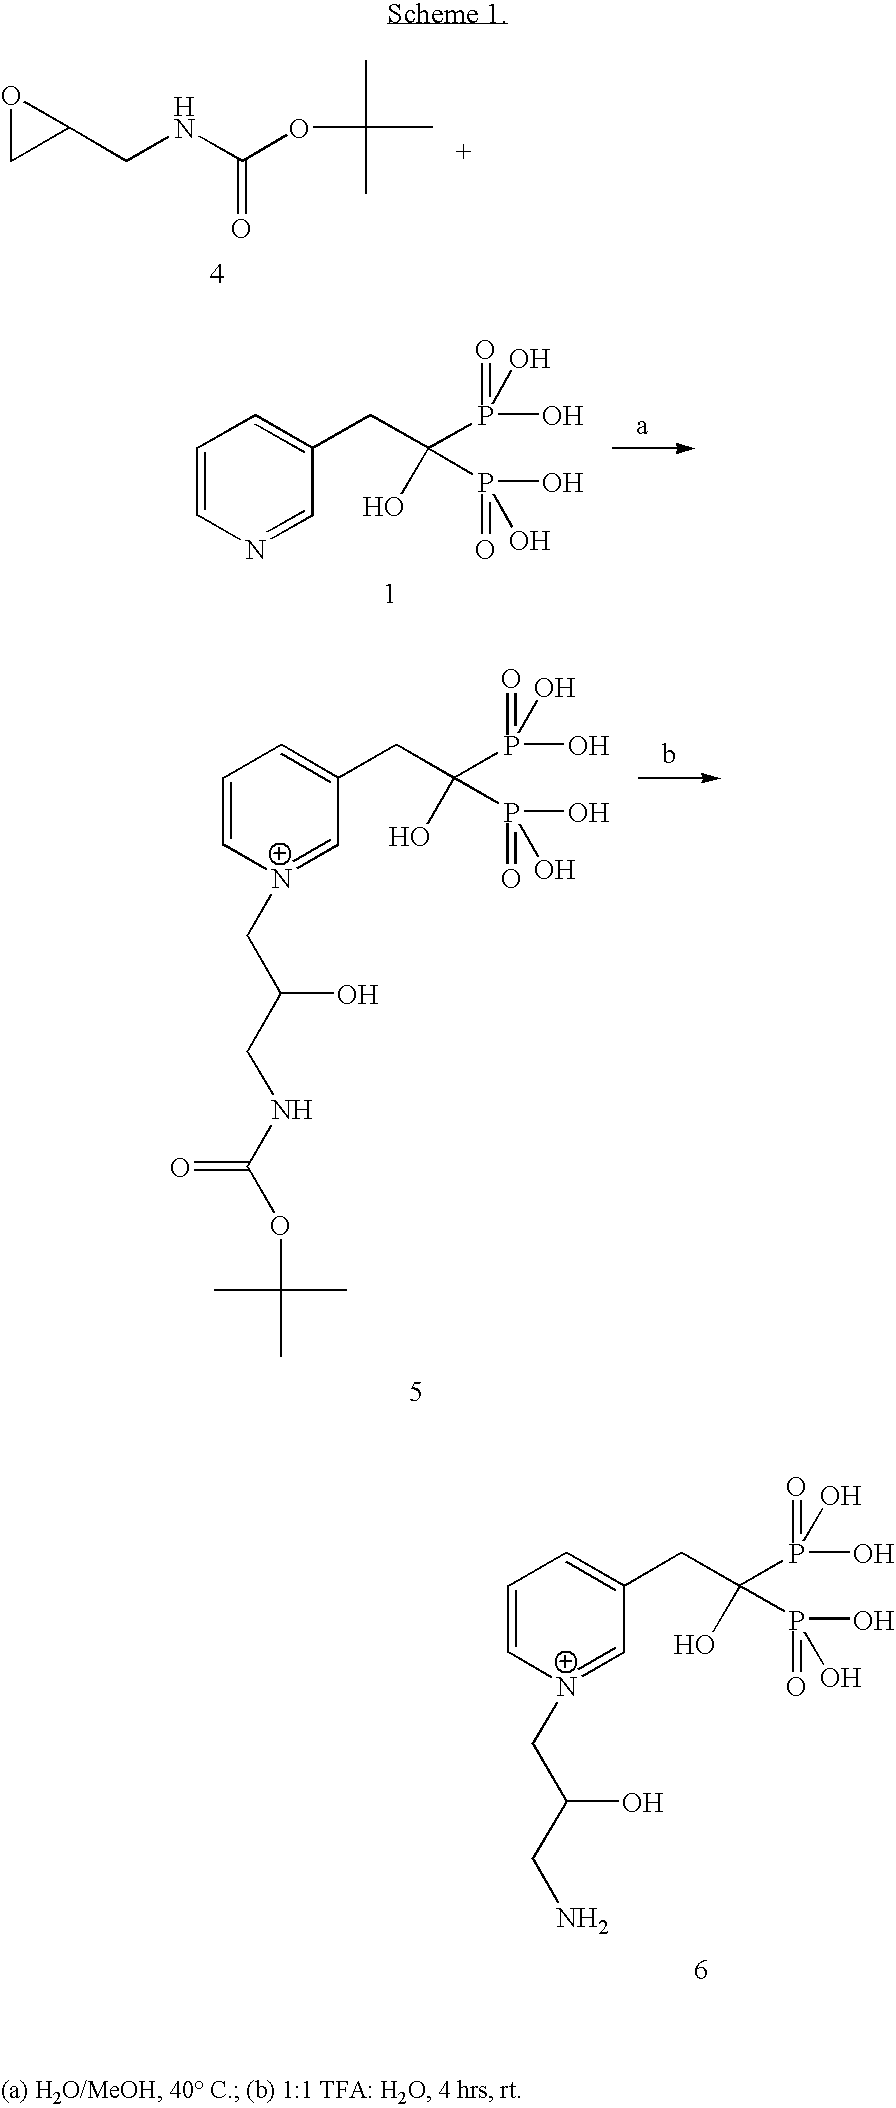 Synthesis of drug conjugates via reaction with epoxide-containing linkers